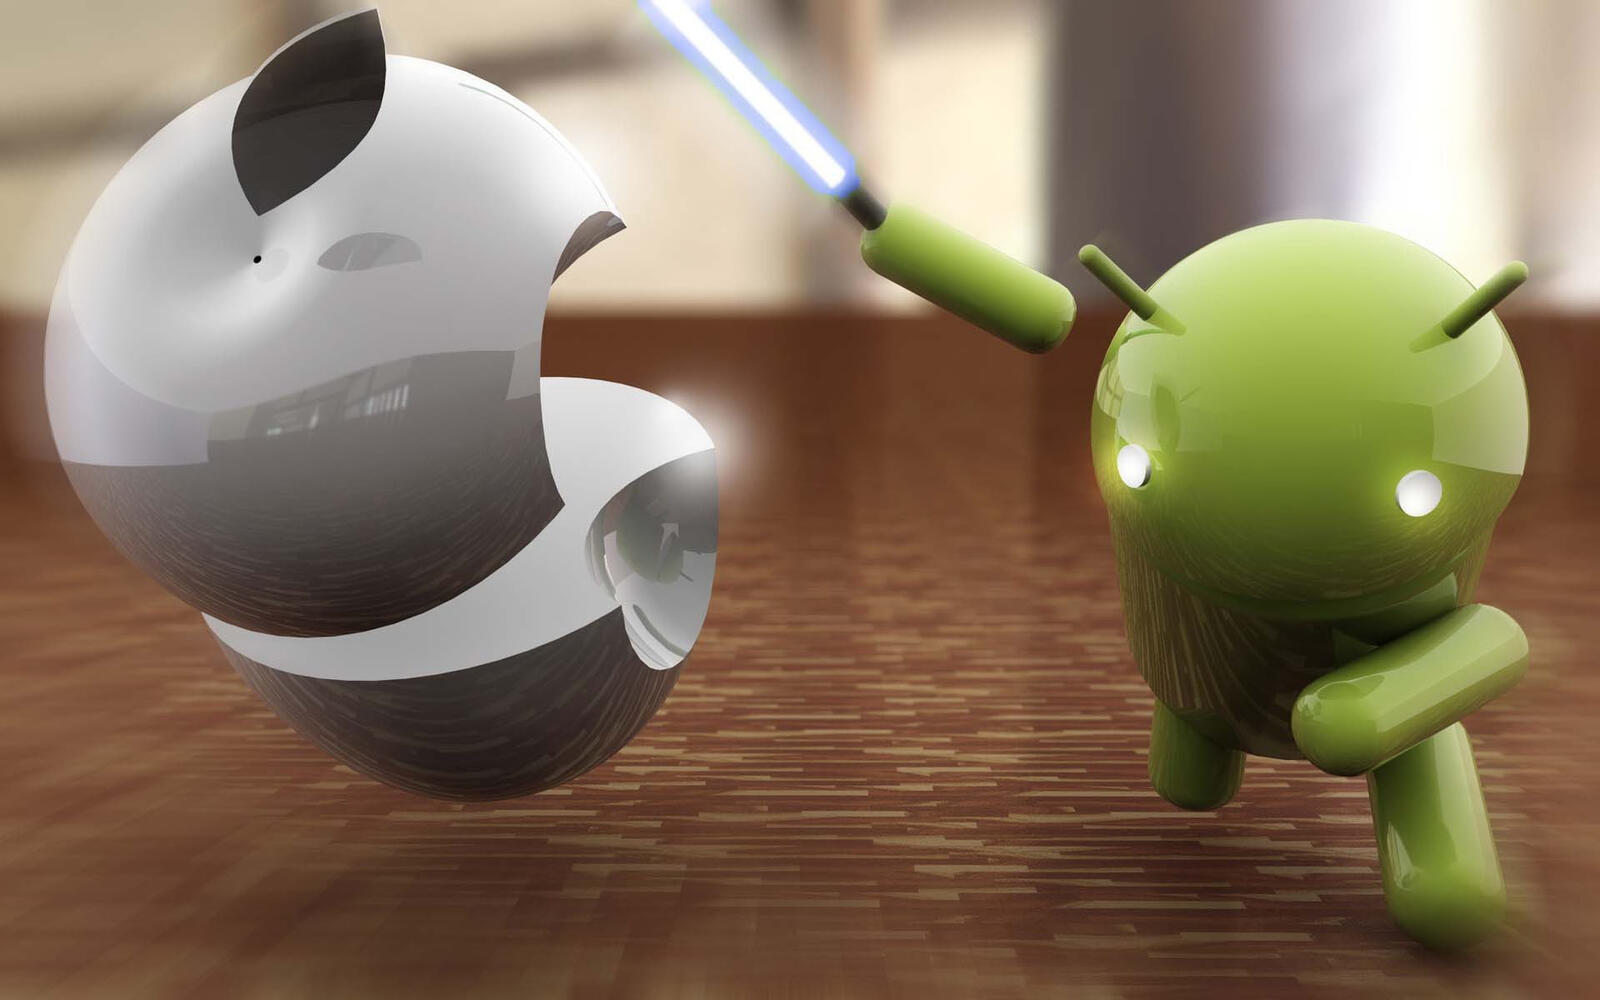 Wallpapers battle Android vs Apple logos on the desktop